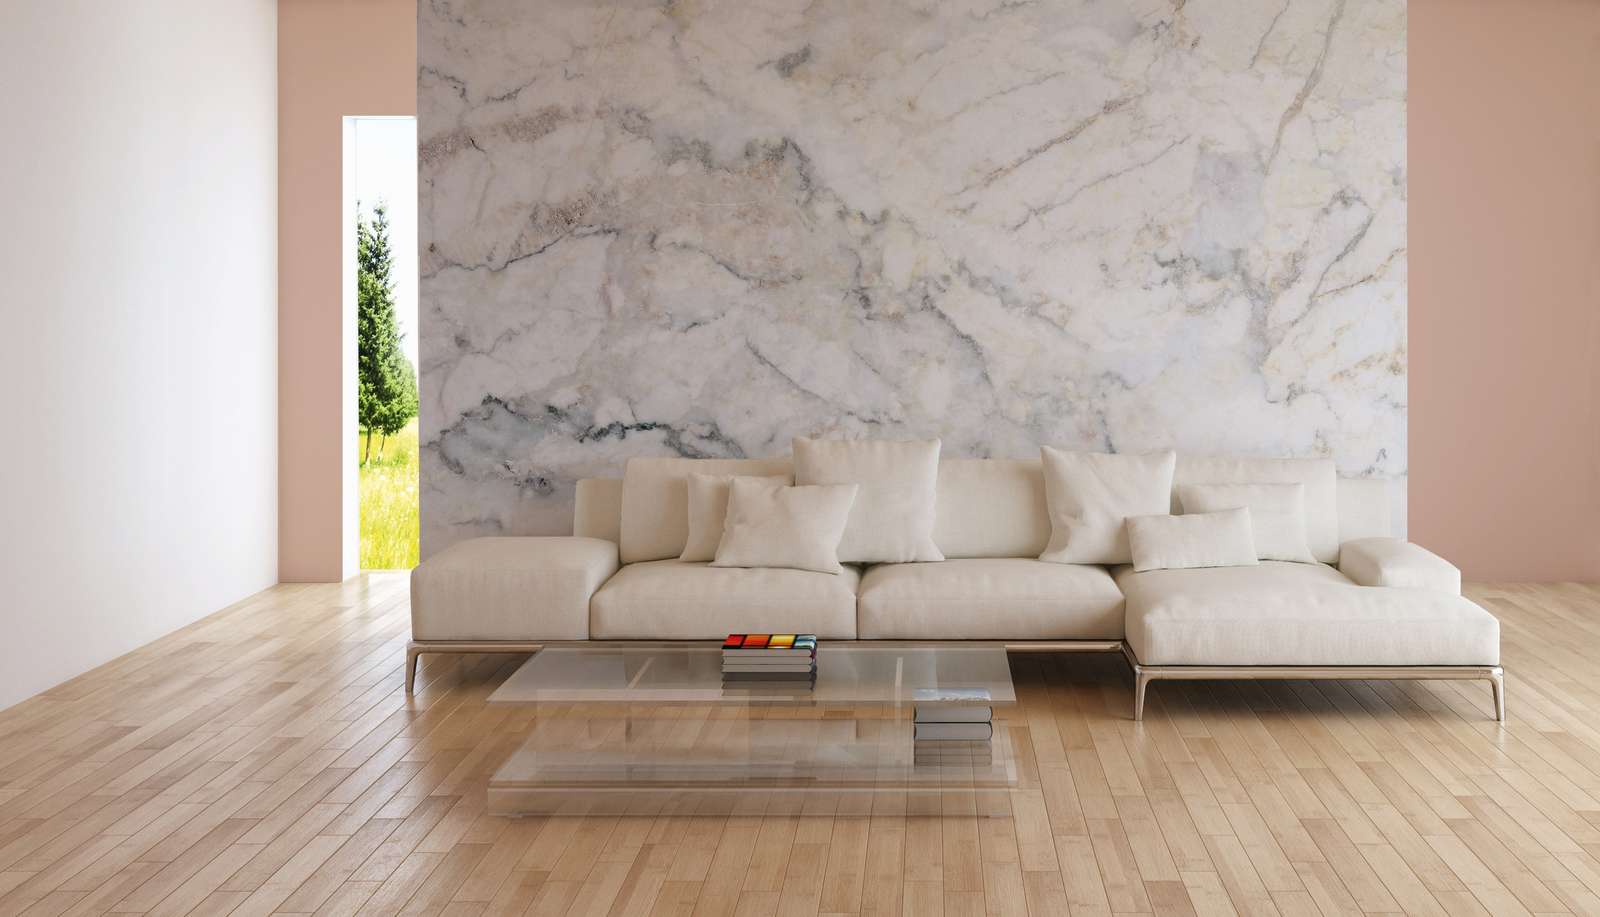             Realistic & Large Marble Wallpaper - Grey, White
        